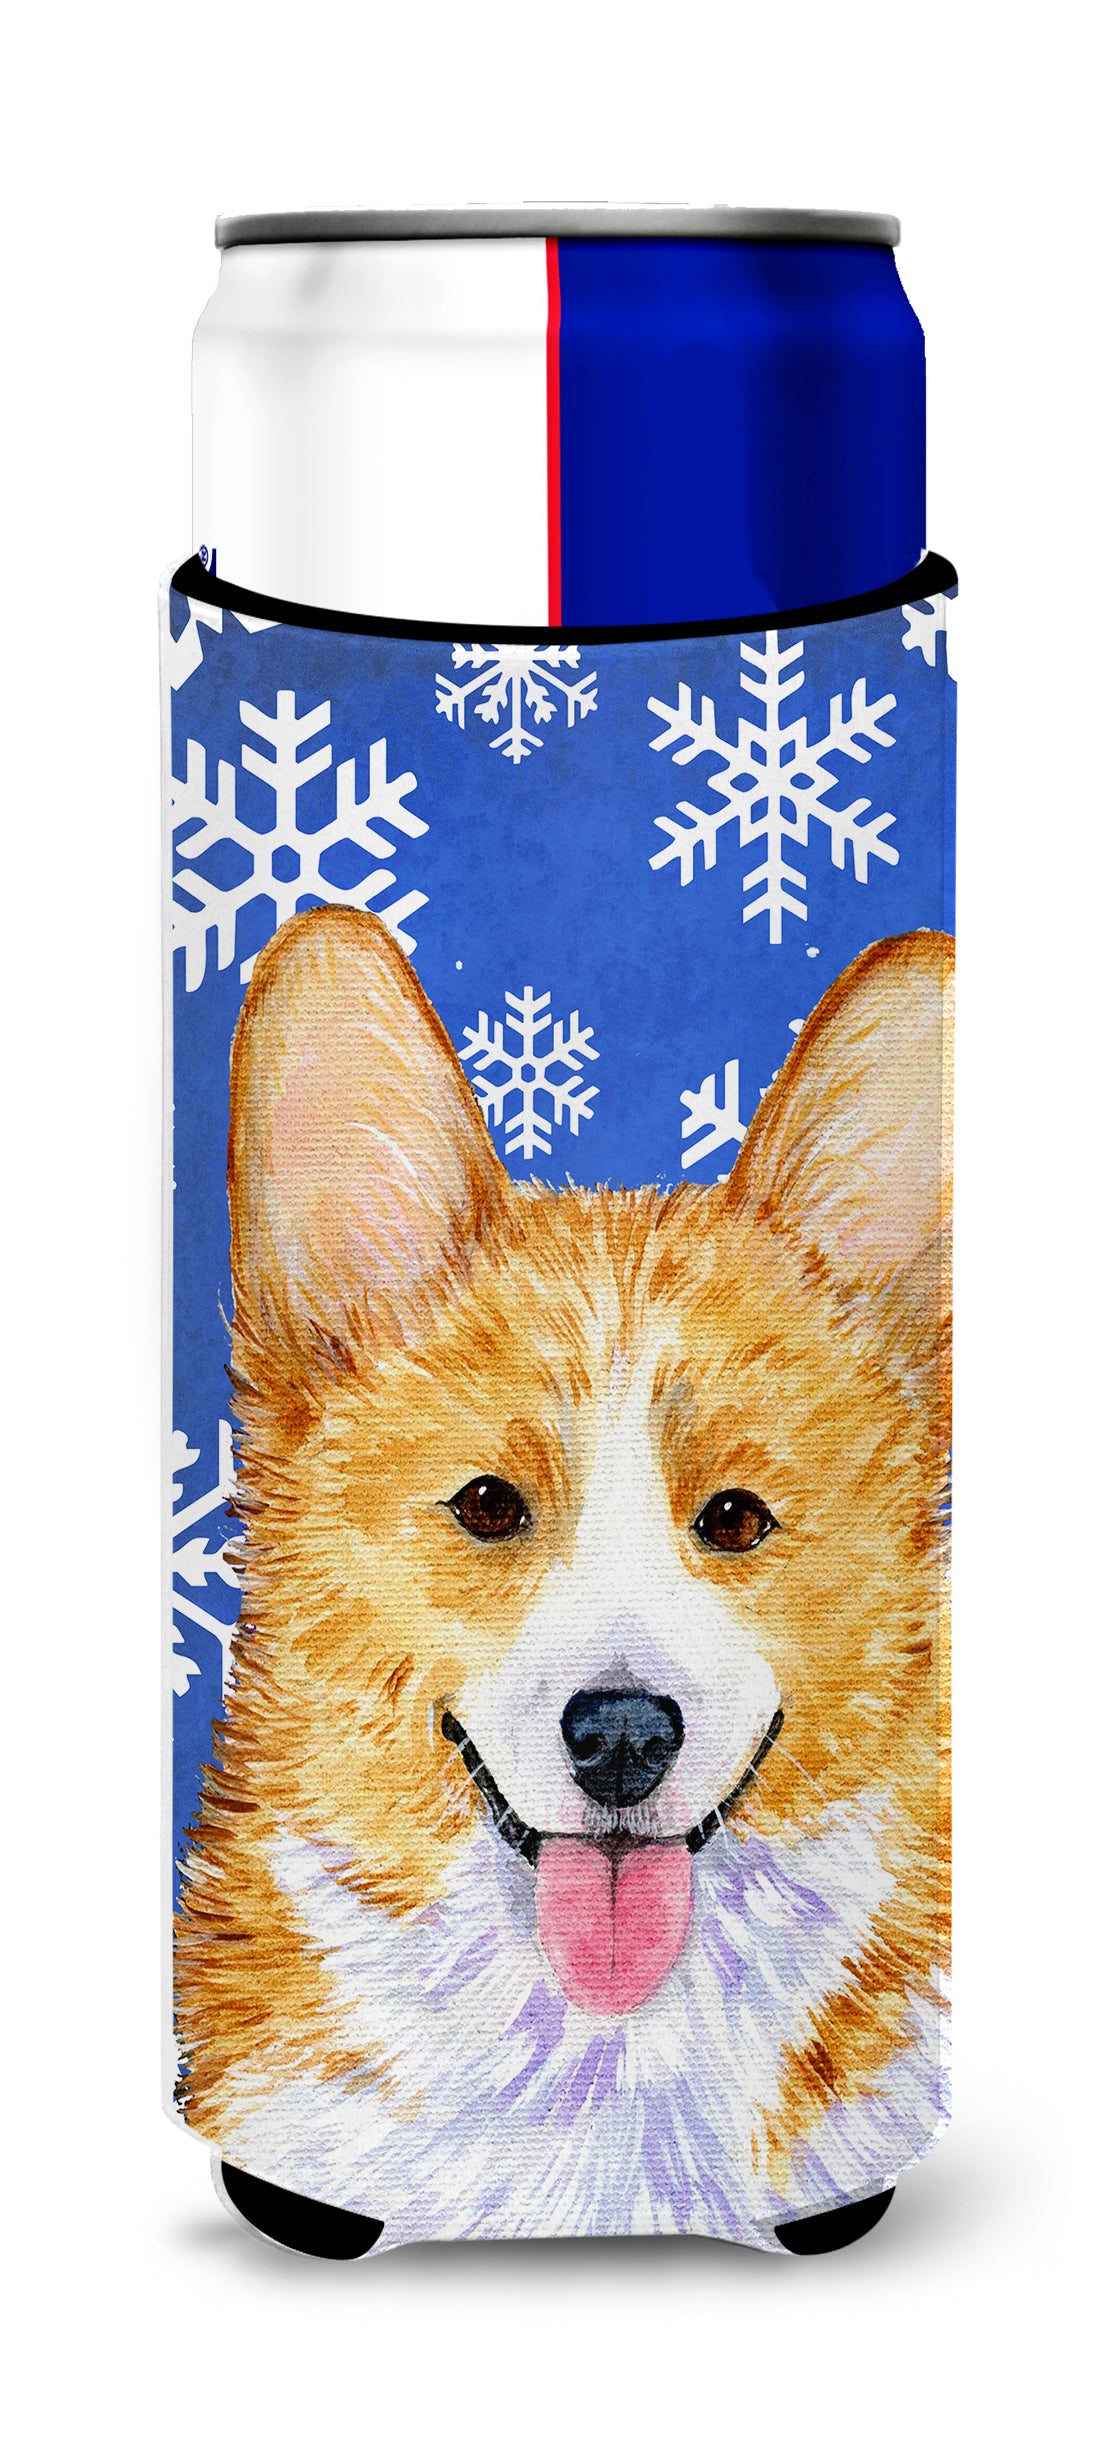 Corgi Winter Snowflakes Holiday Ultra Beverage Insulators for slim cans SS4624MUK.